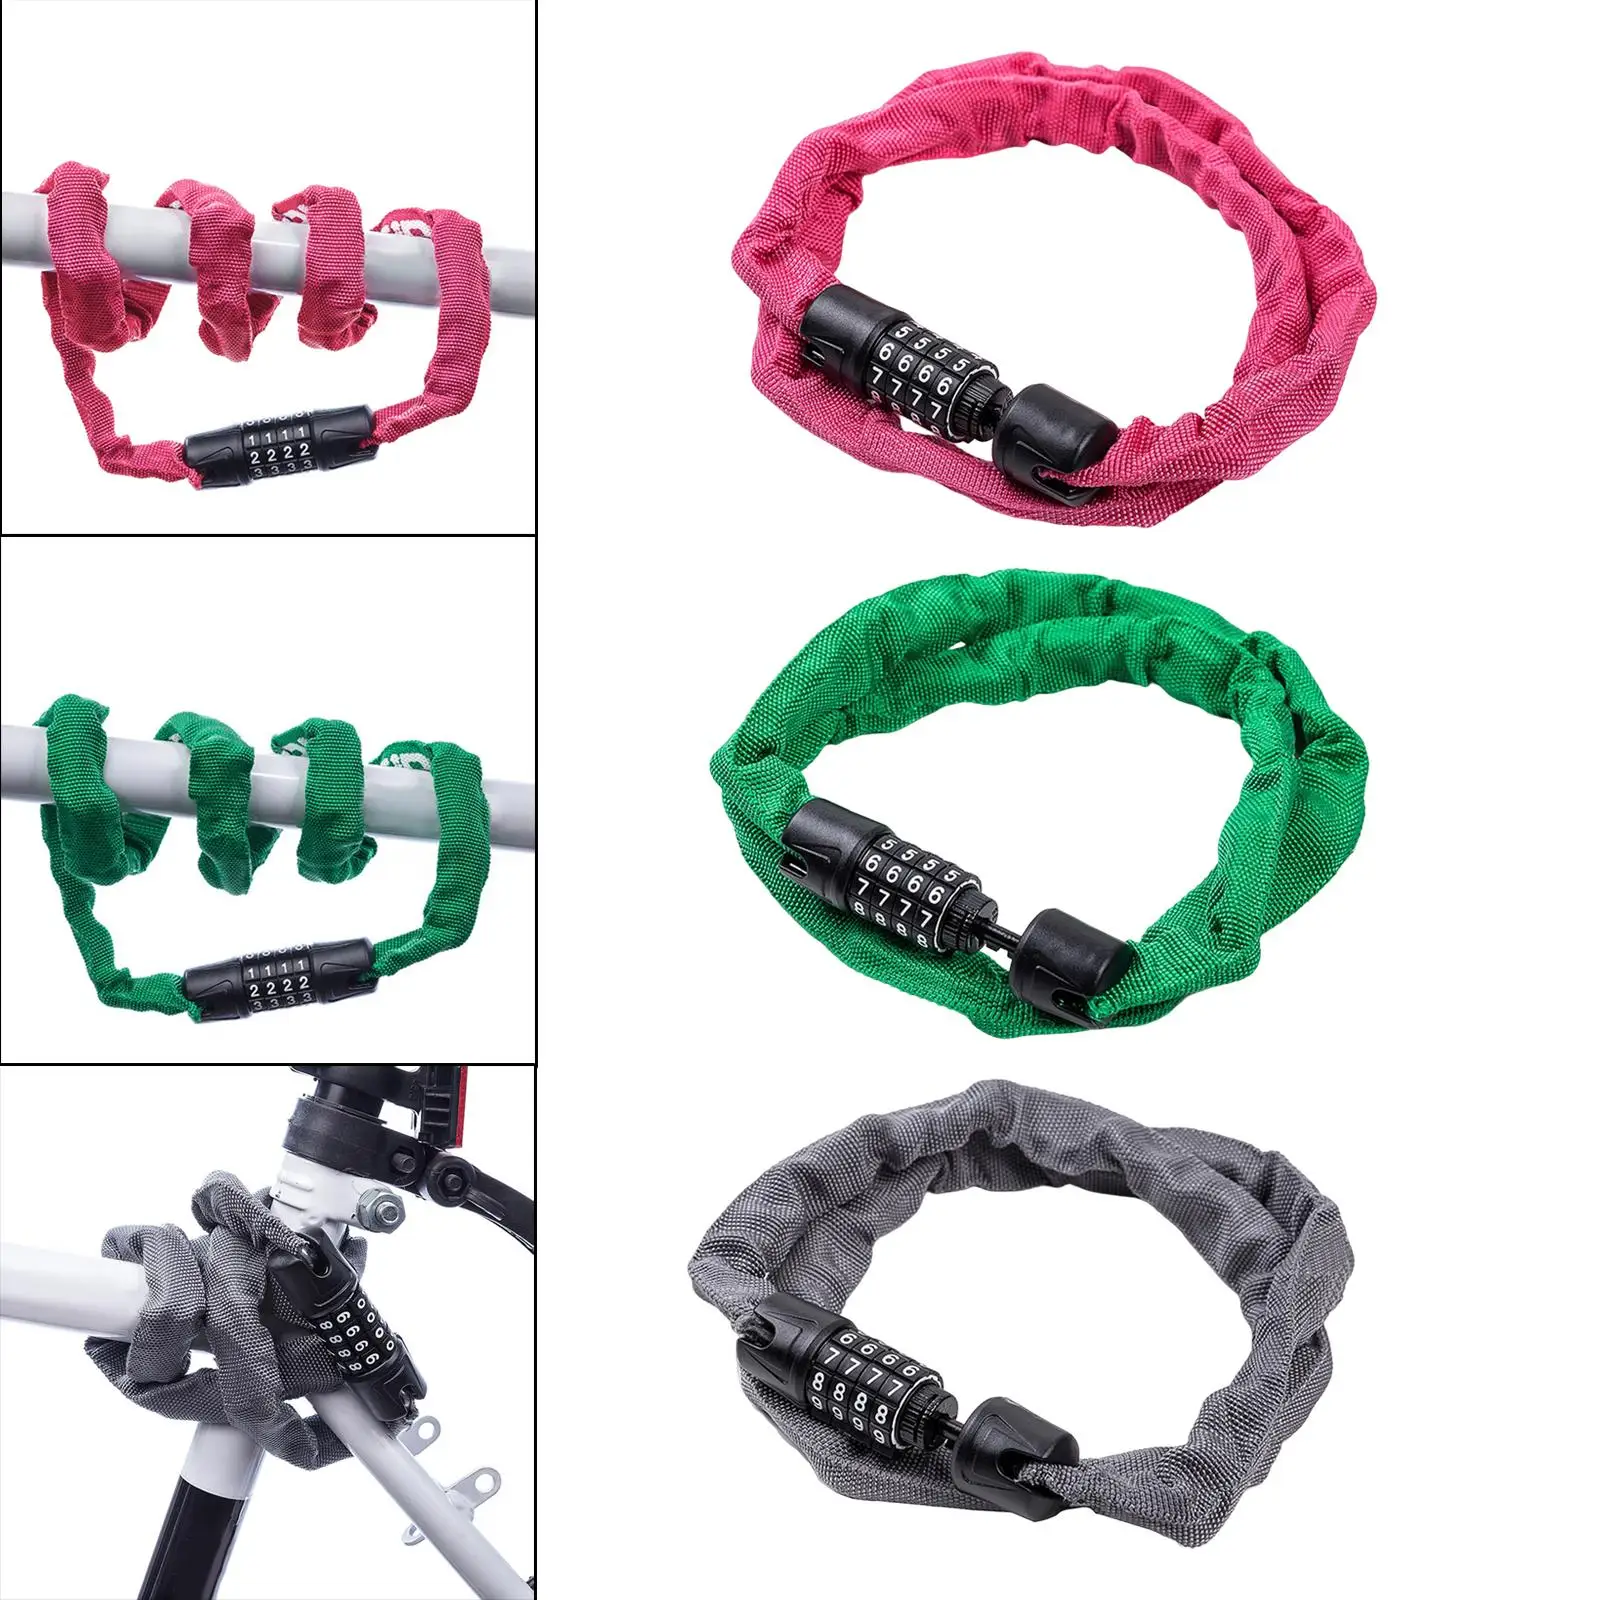 4 Digit Code Lock Safety Anti Theft Password Chain Lock MTB Road Chain Lock Outdoor Cycling Bicycle Accessories